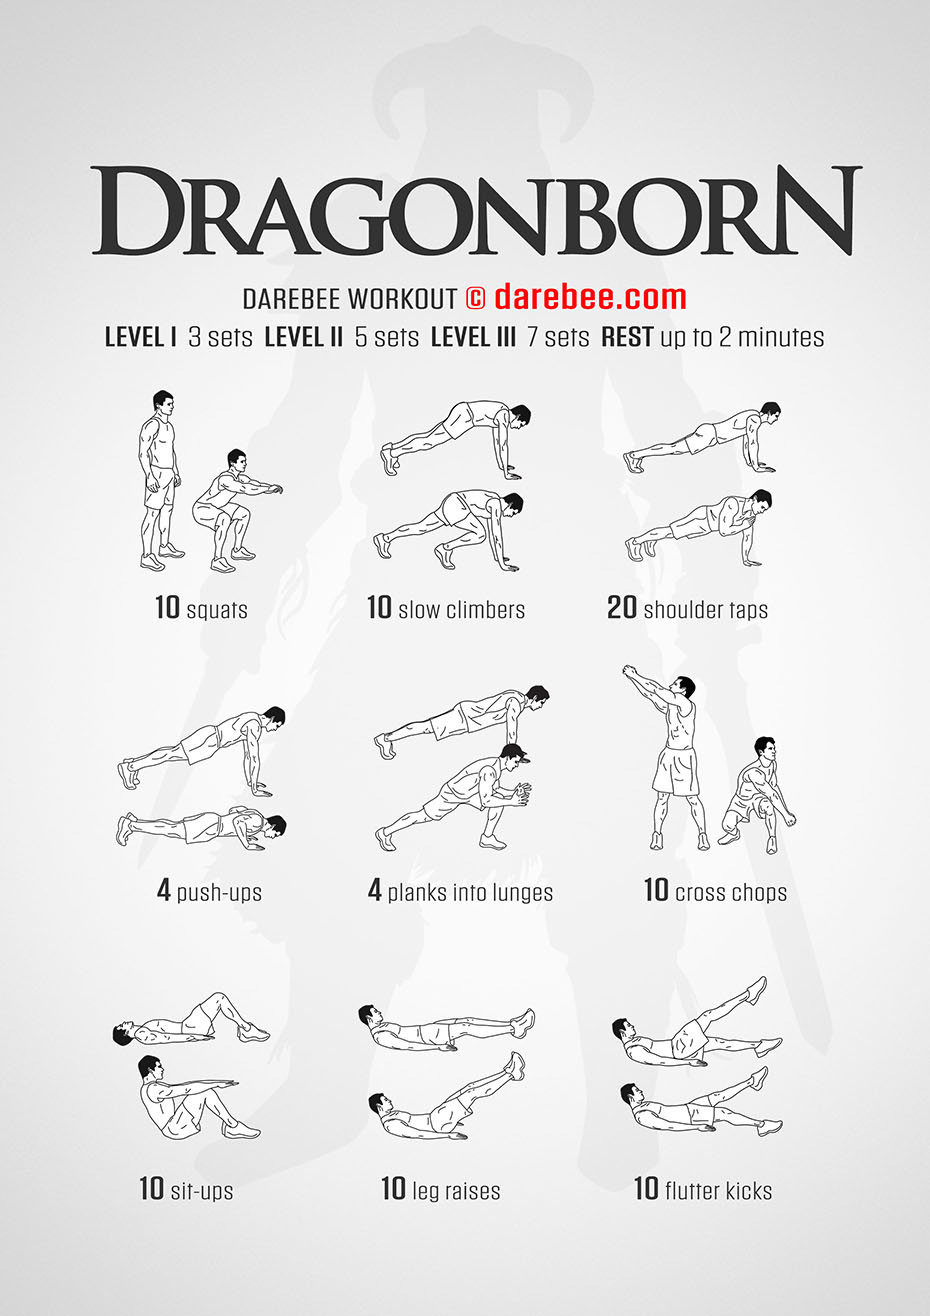 Dragonborn is a DAREBEE home fitness tribute to Skyrim no-equipment, total body strength workout you can do at home.